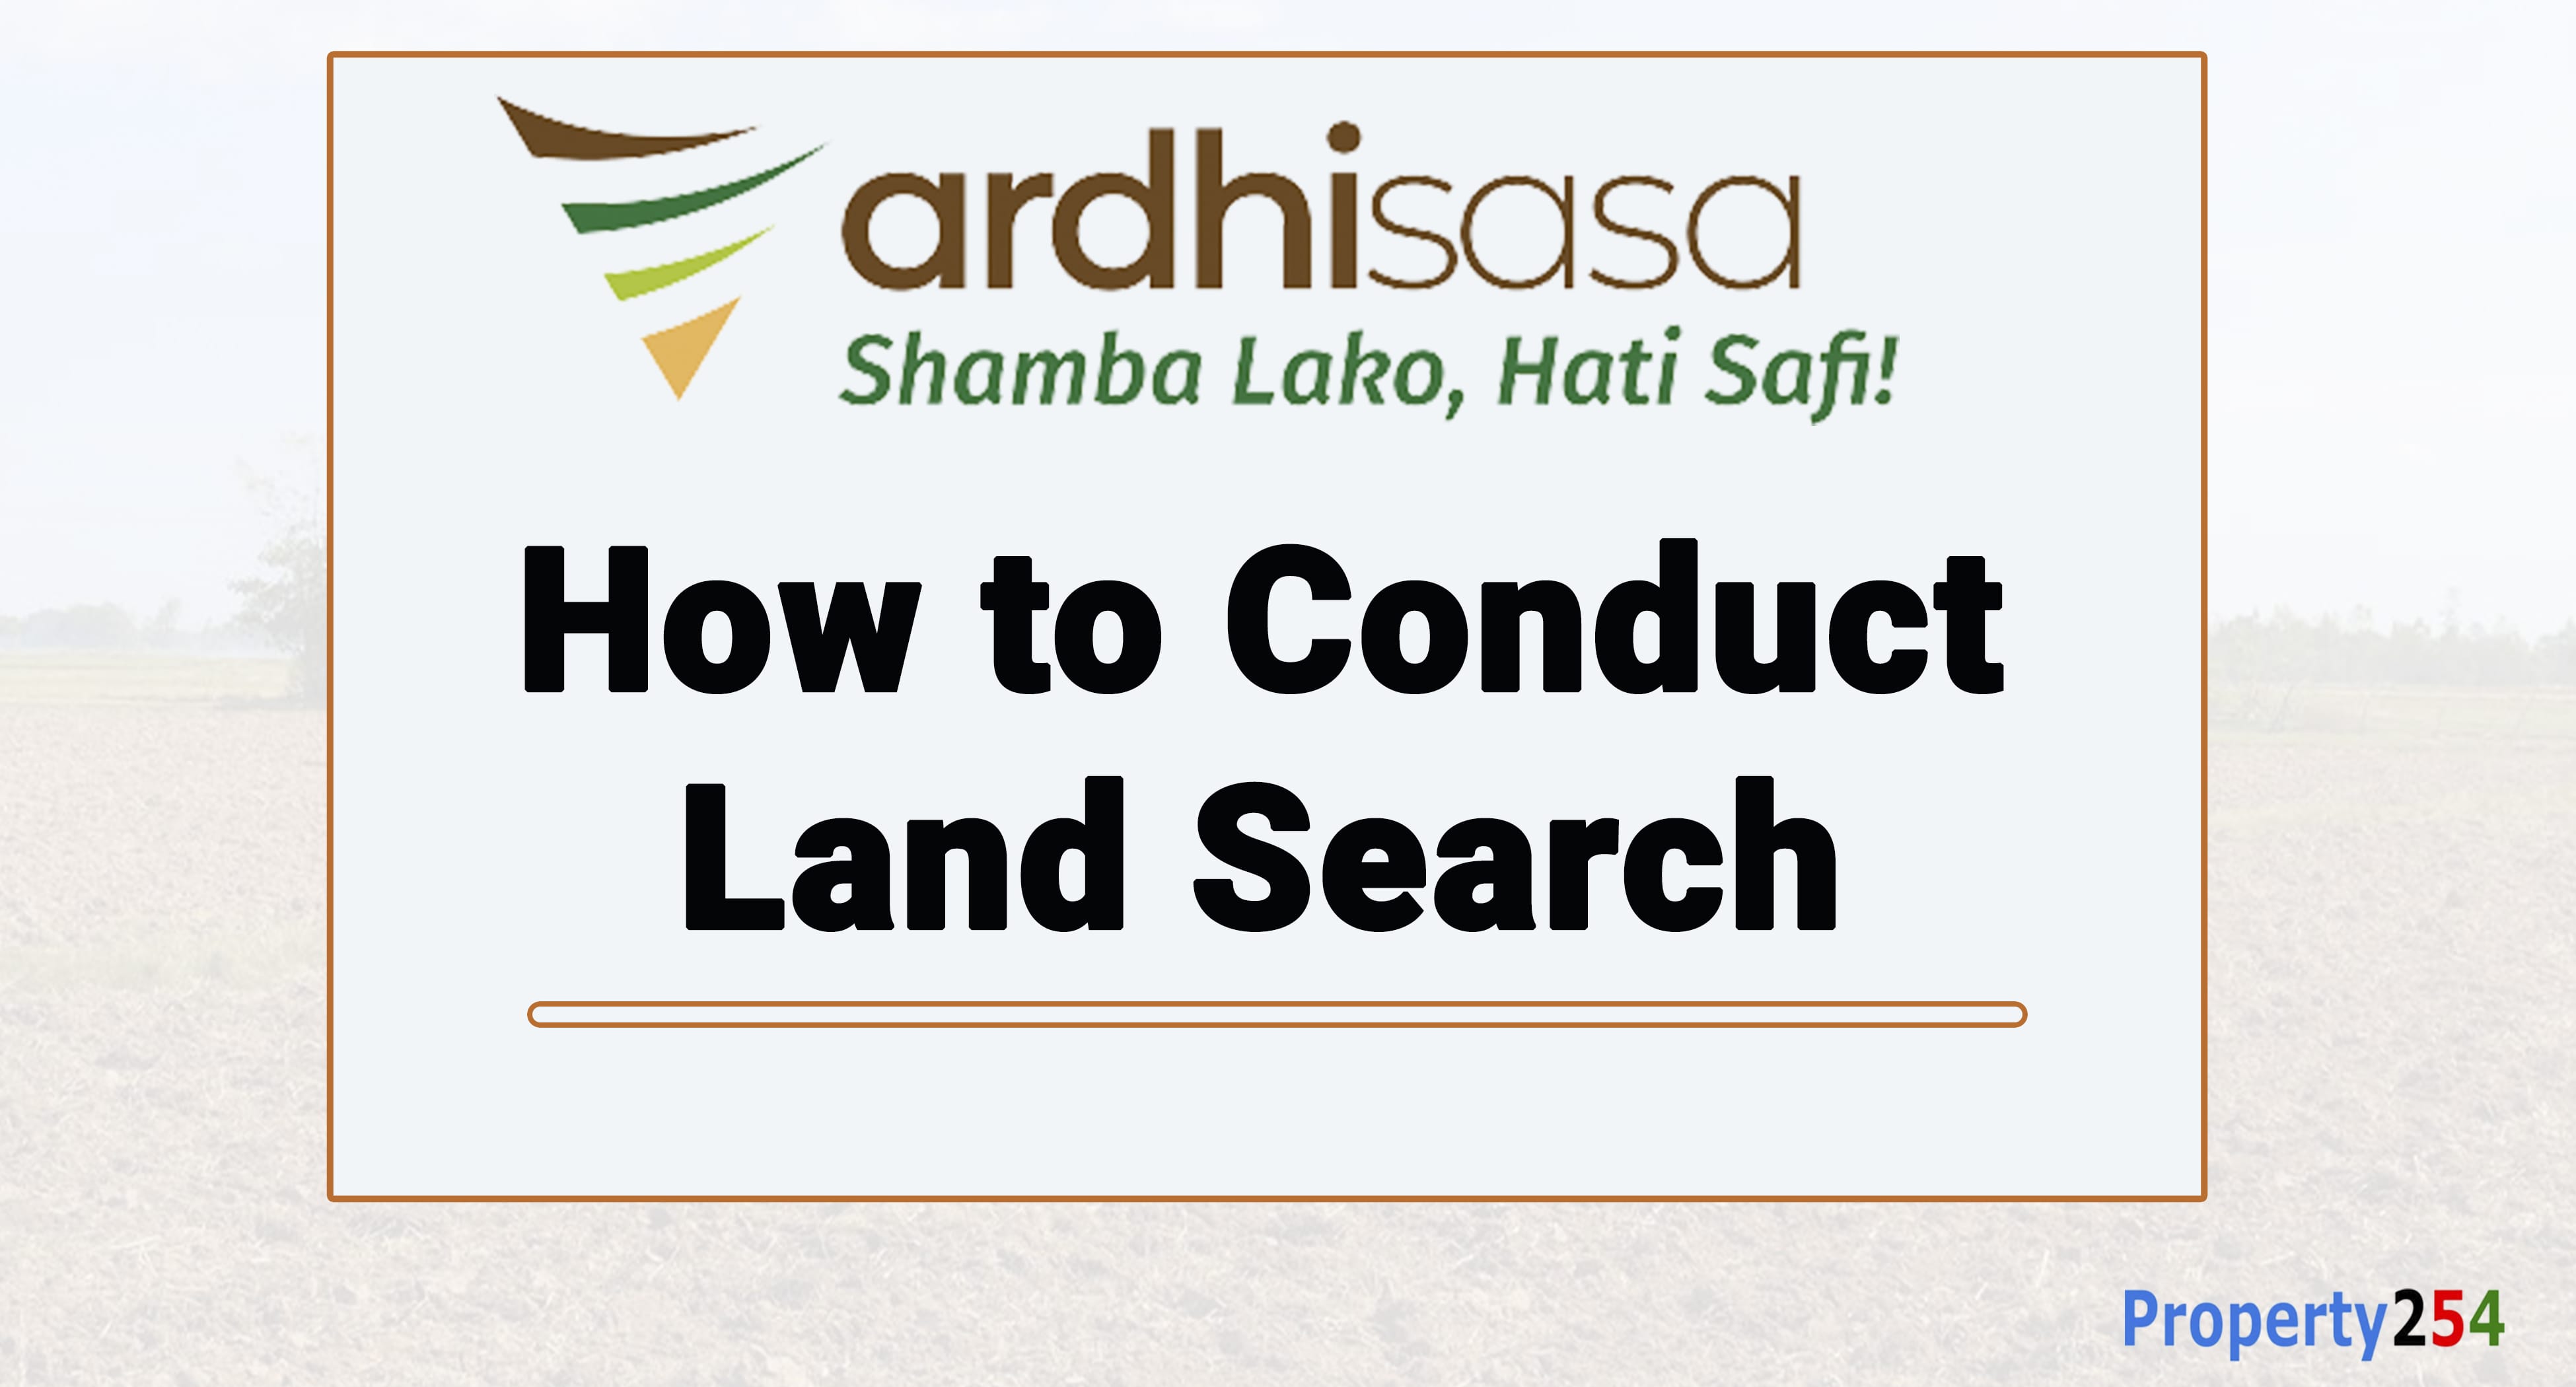 How to Conduct Land Search on Ardhisasa thumbnail